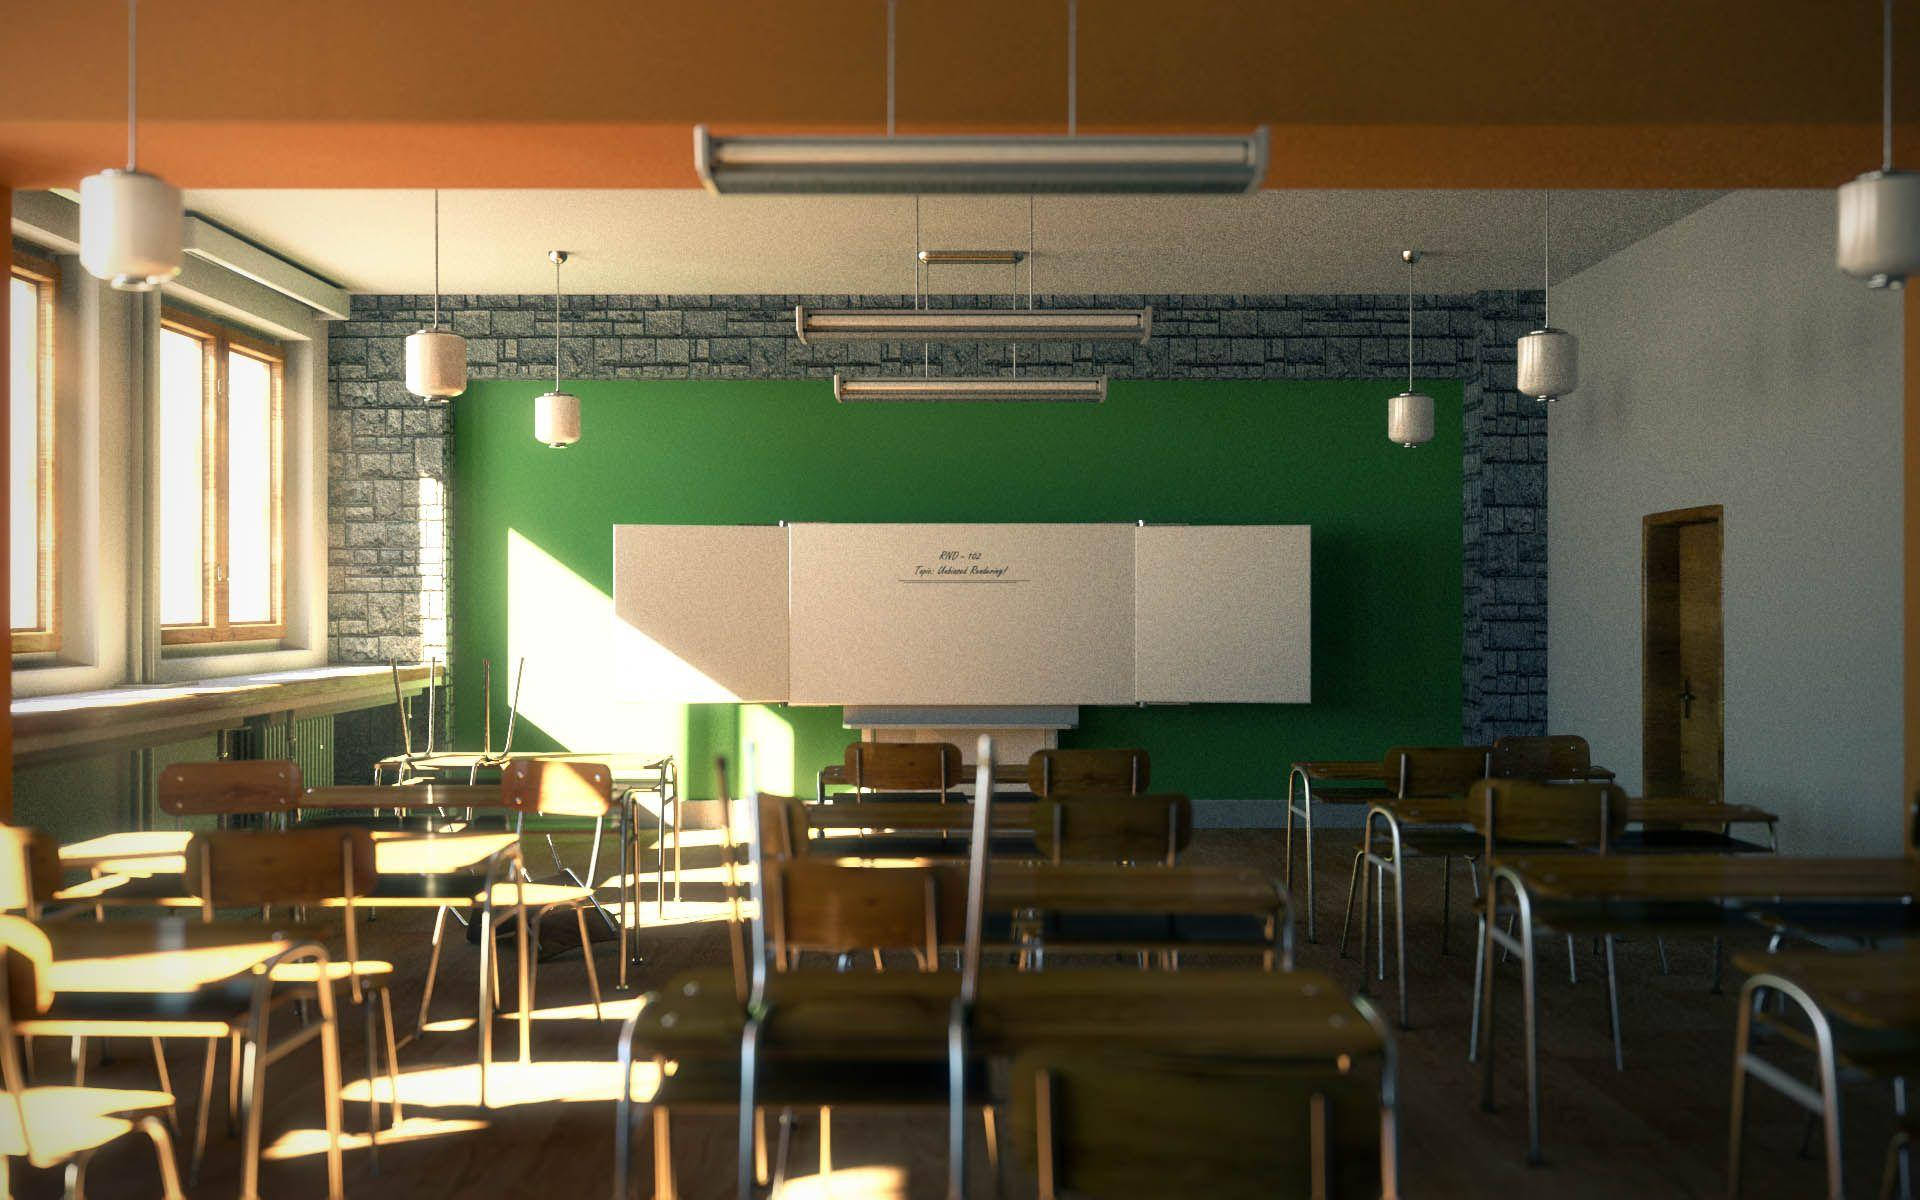 Classroom With Bright Sunlight